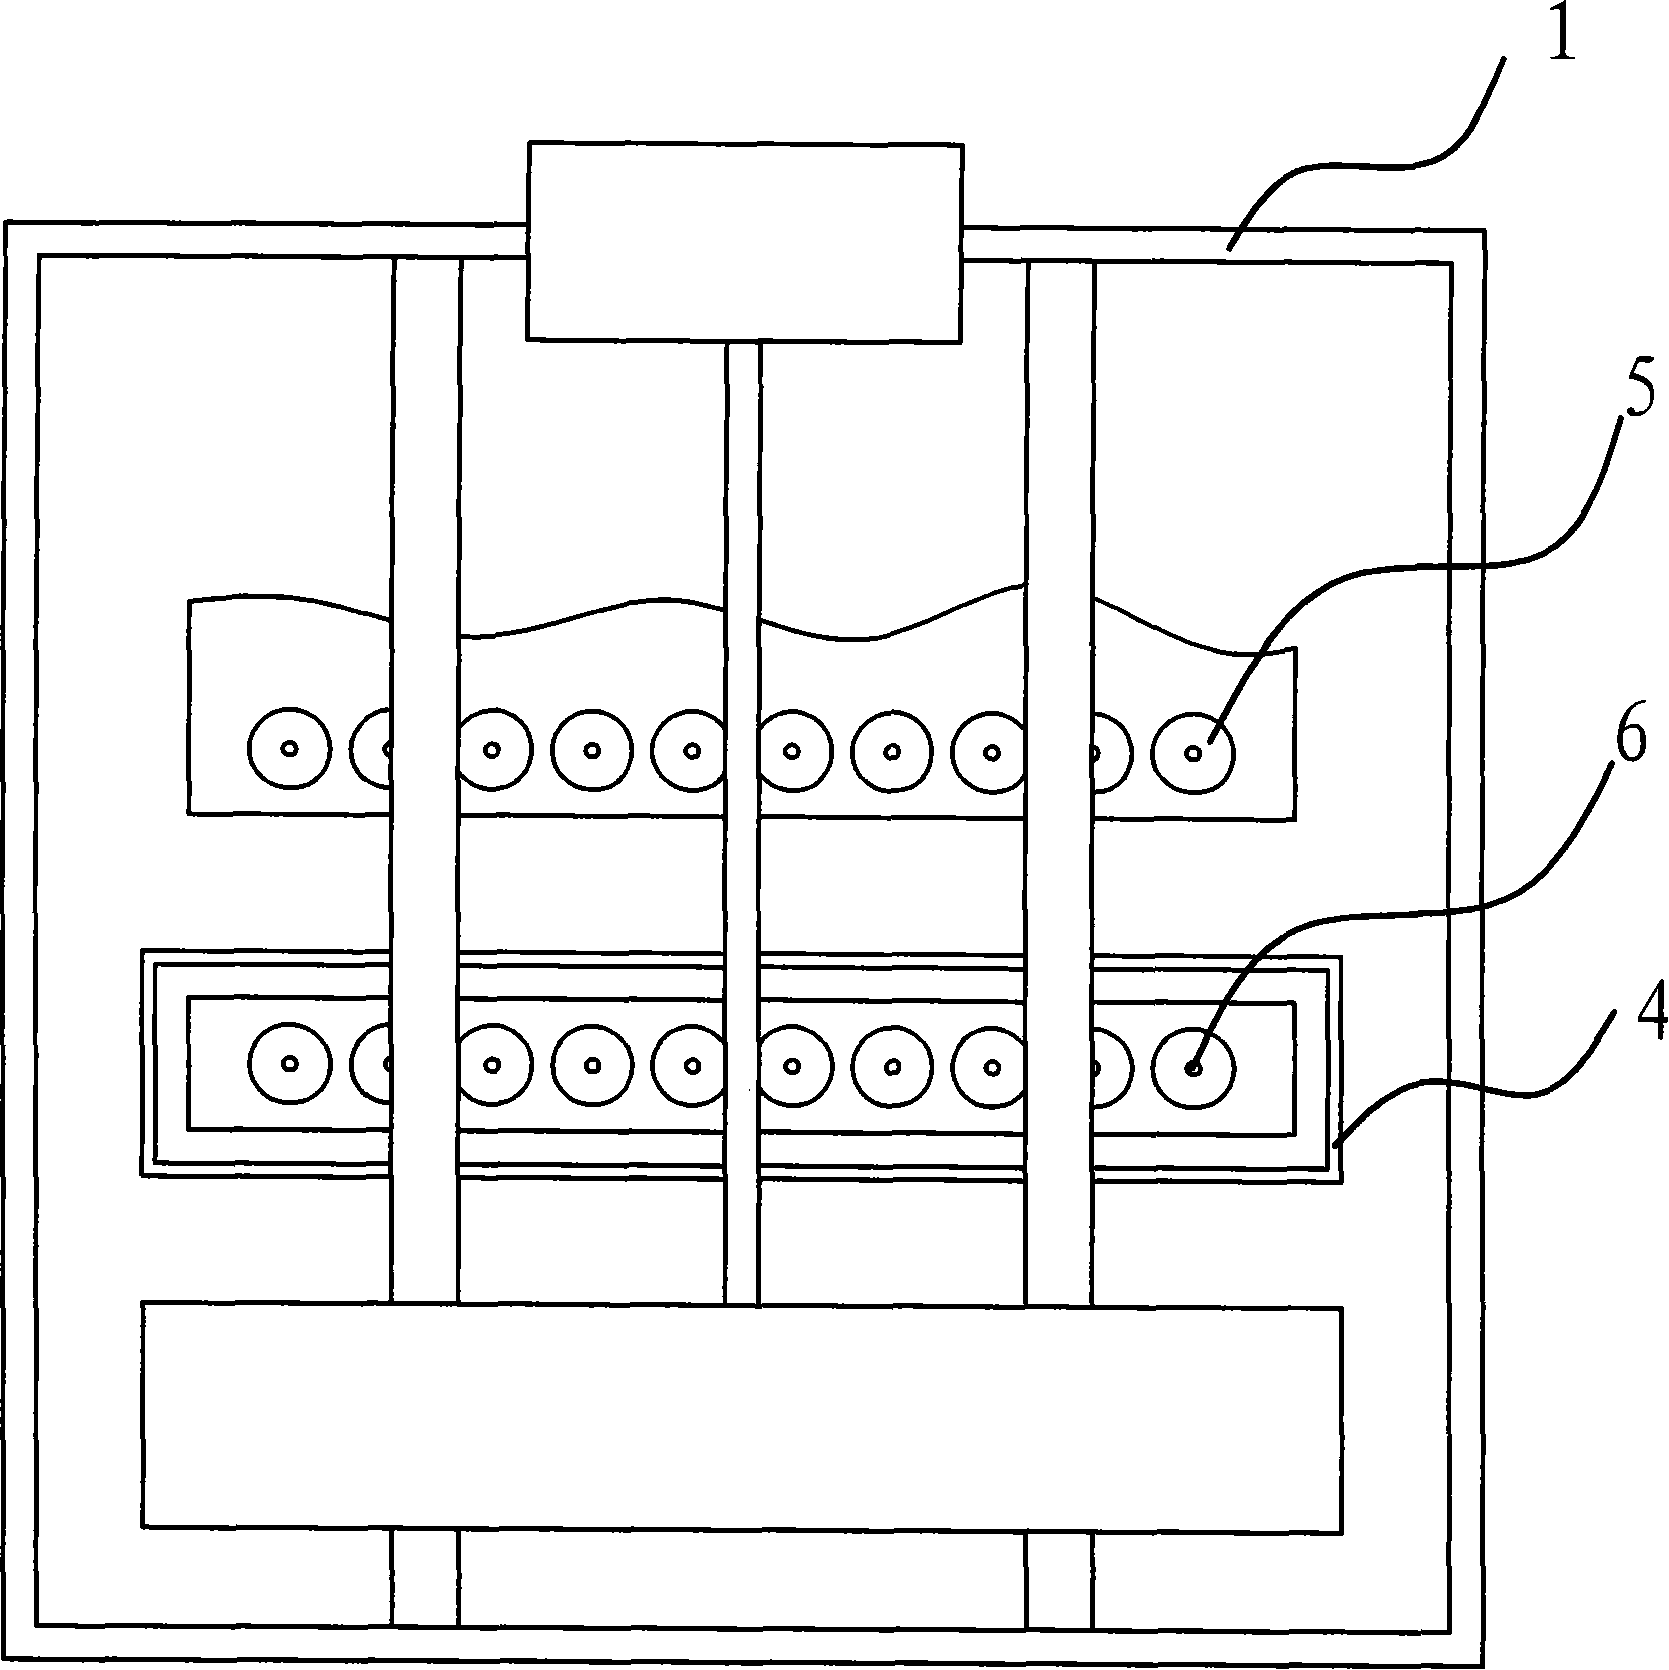 Transfusion device automatic assembling and rubber coating device